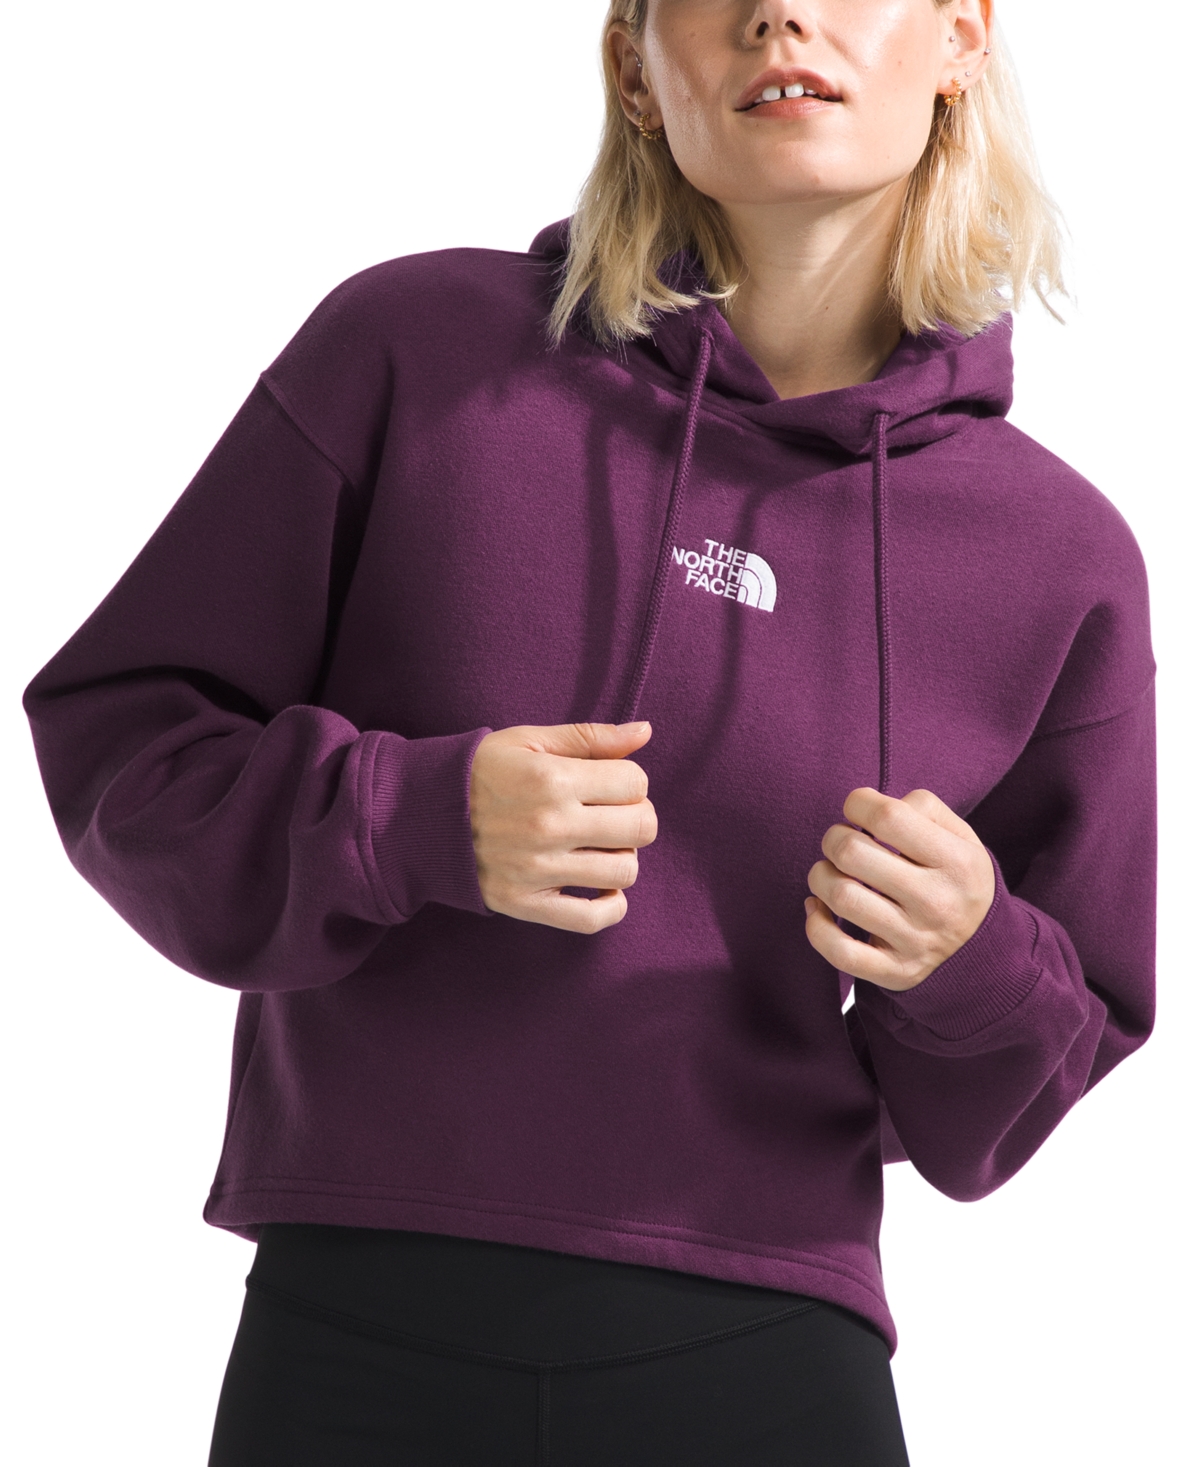 The North Face: Women's Evolution Hi Lo Fleece Hoodie $30 & More + Free Shipping